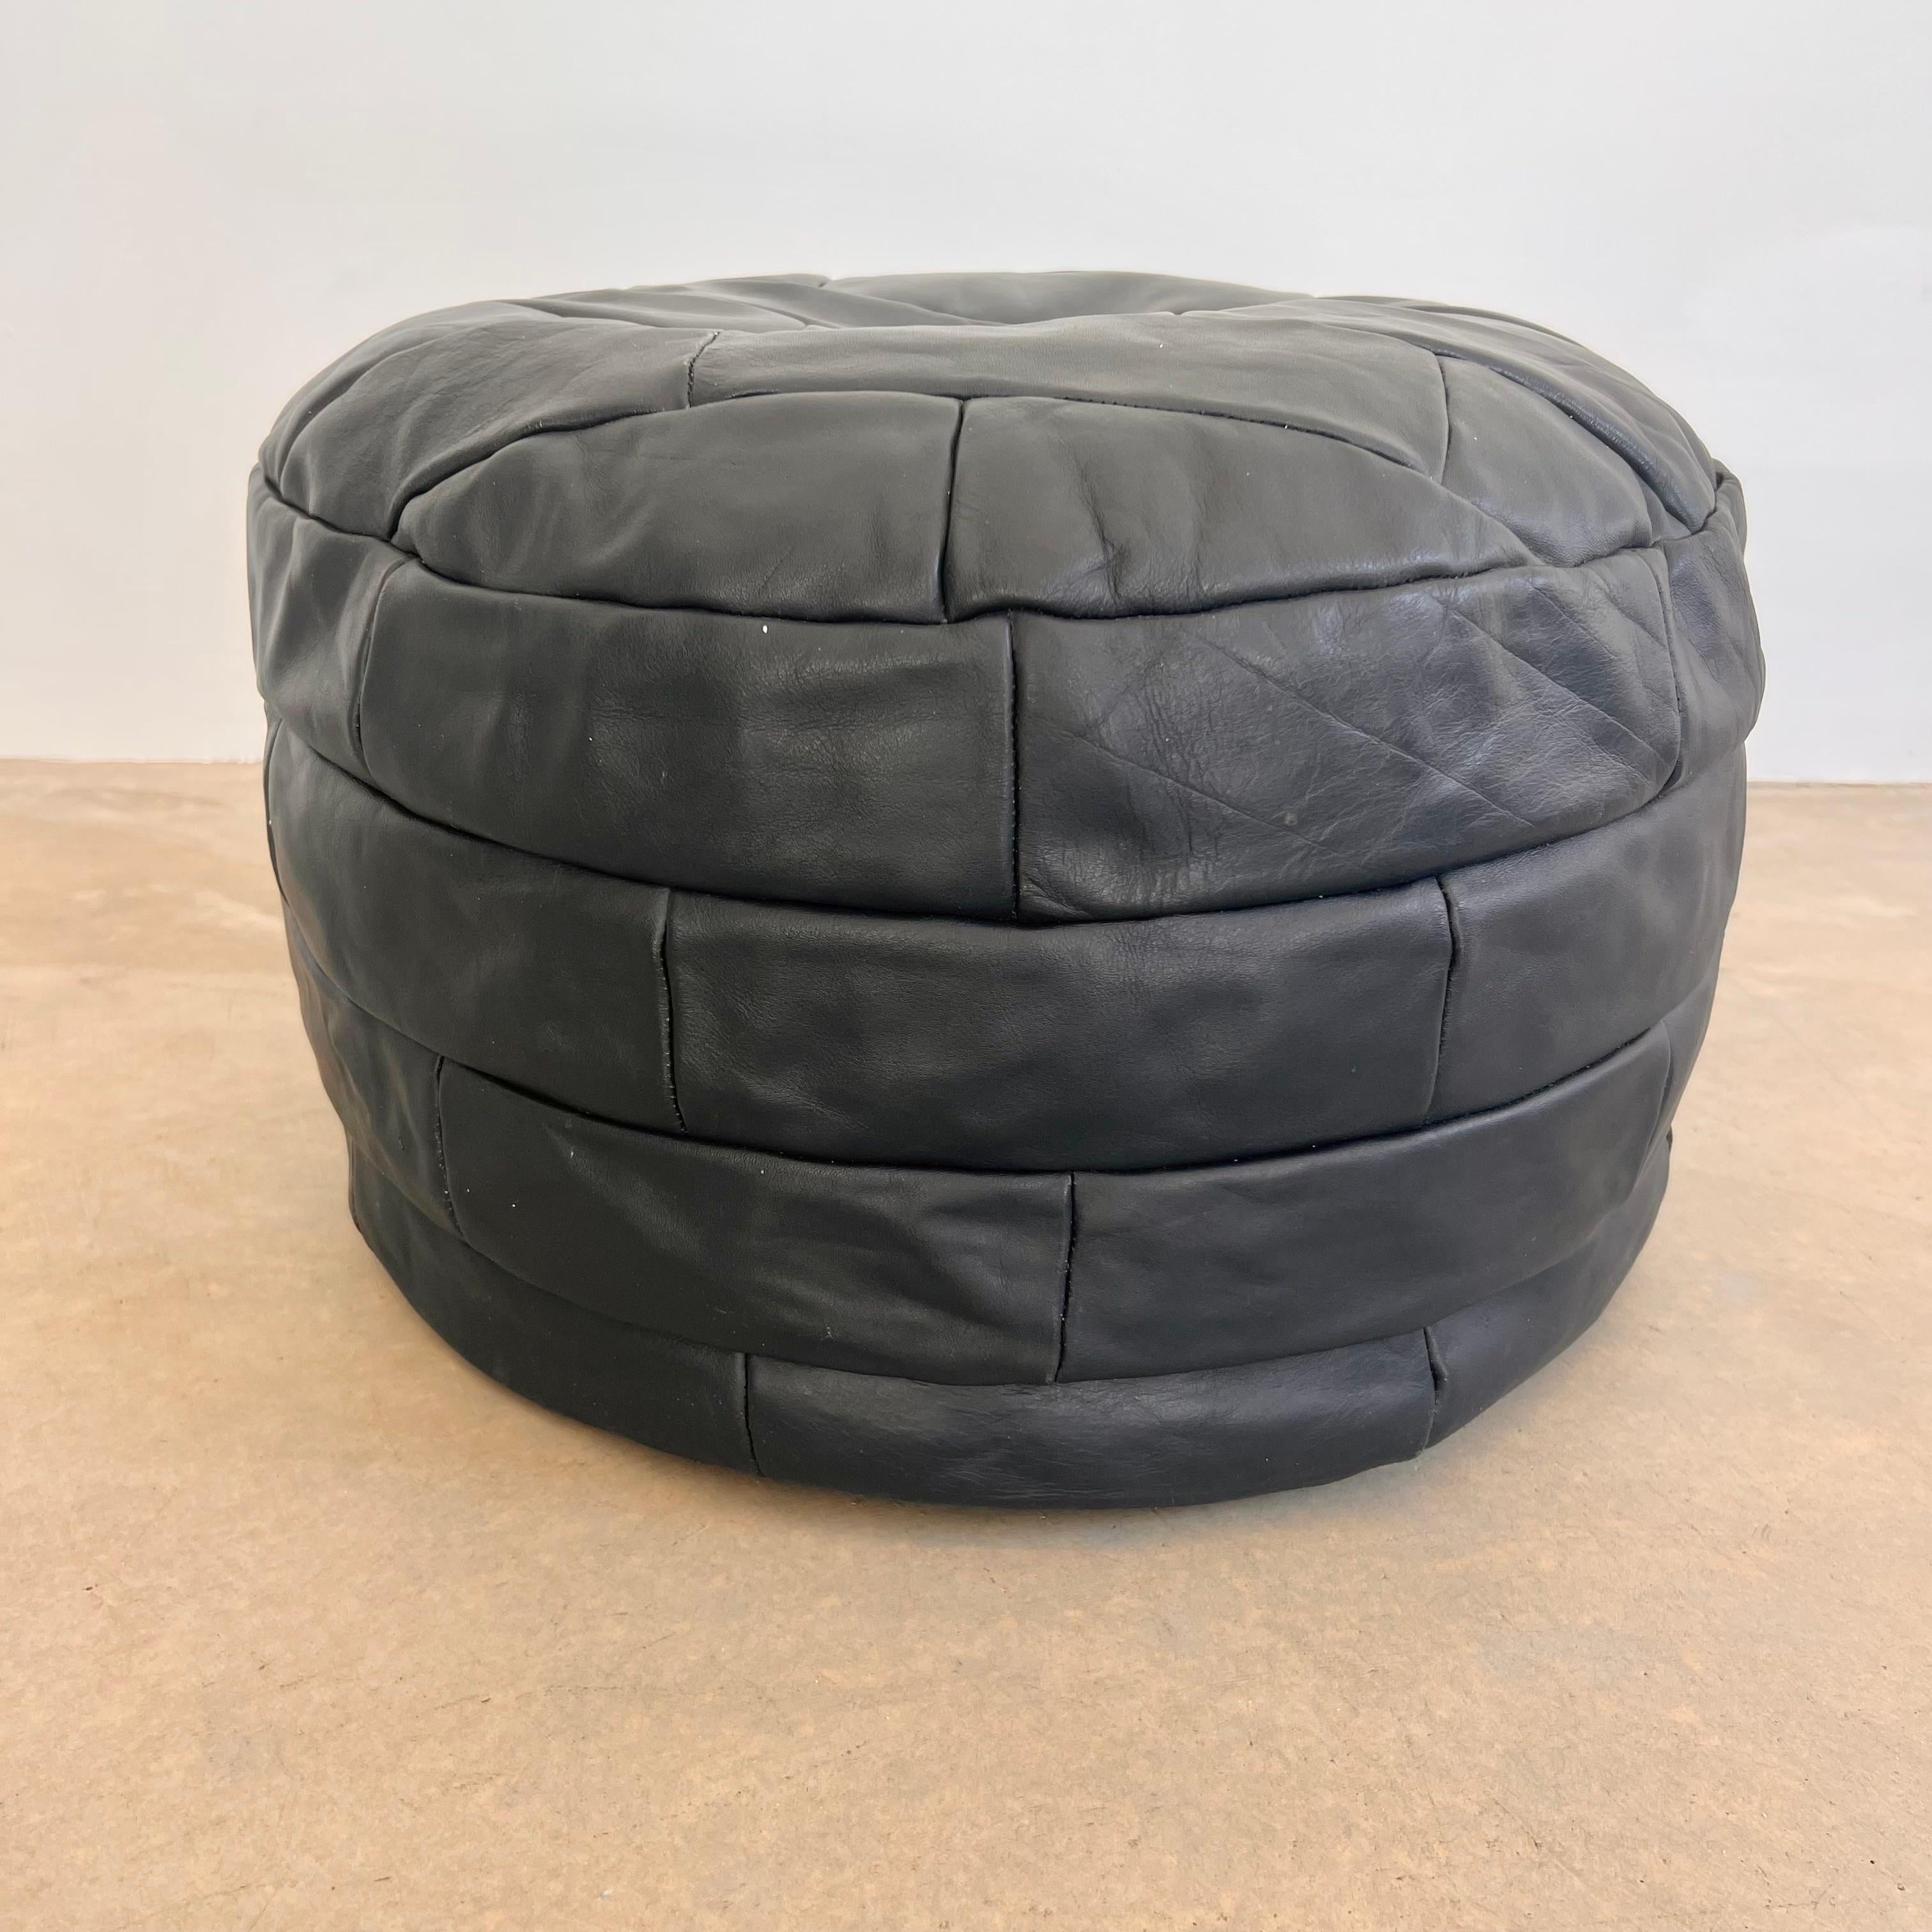 Sophisticated black leather pouf/ottoman by Swiss designer De Sede with square patchwork. Handmade with wonderful faded patina. Gorgeous accent piece. Good vintage condition. Wear appropriate with age. Brand new filler. Perfect living room decor,